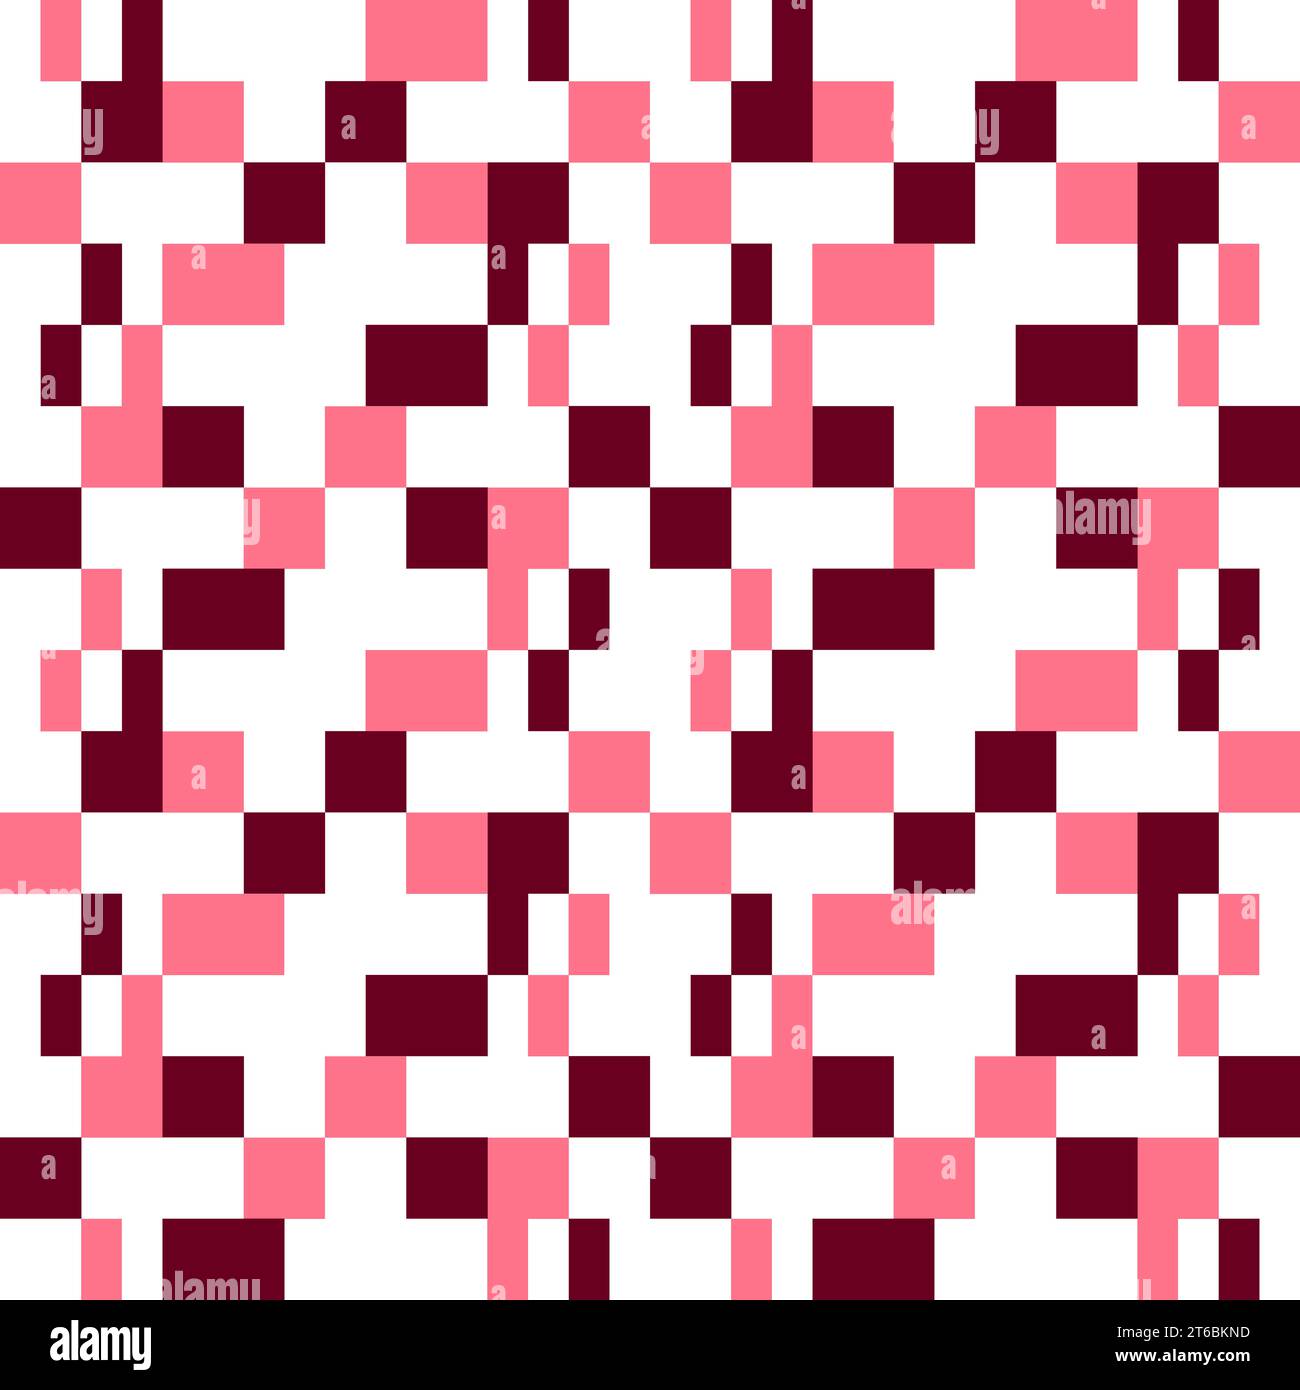 Seamless pattern with geometric motifs in 3 colors Stock Photo